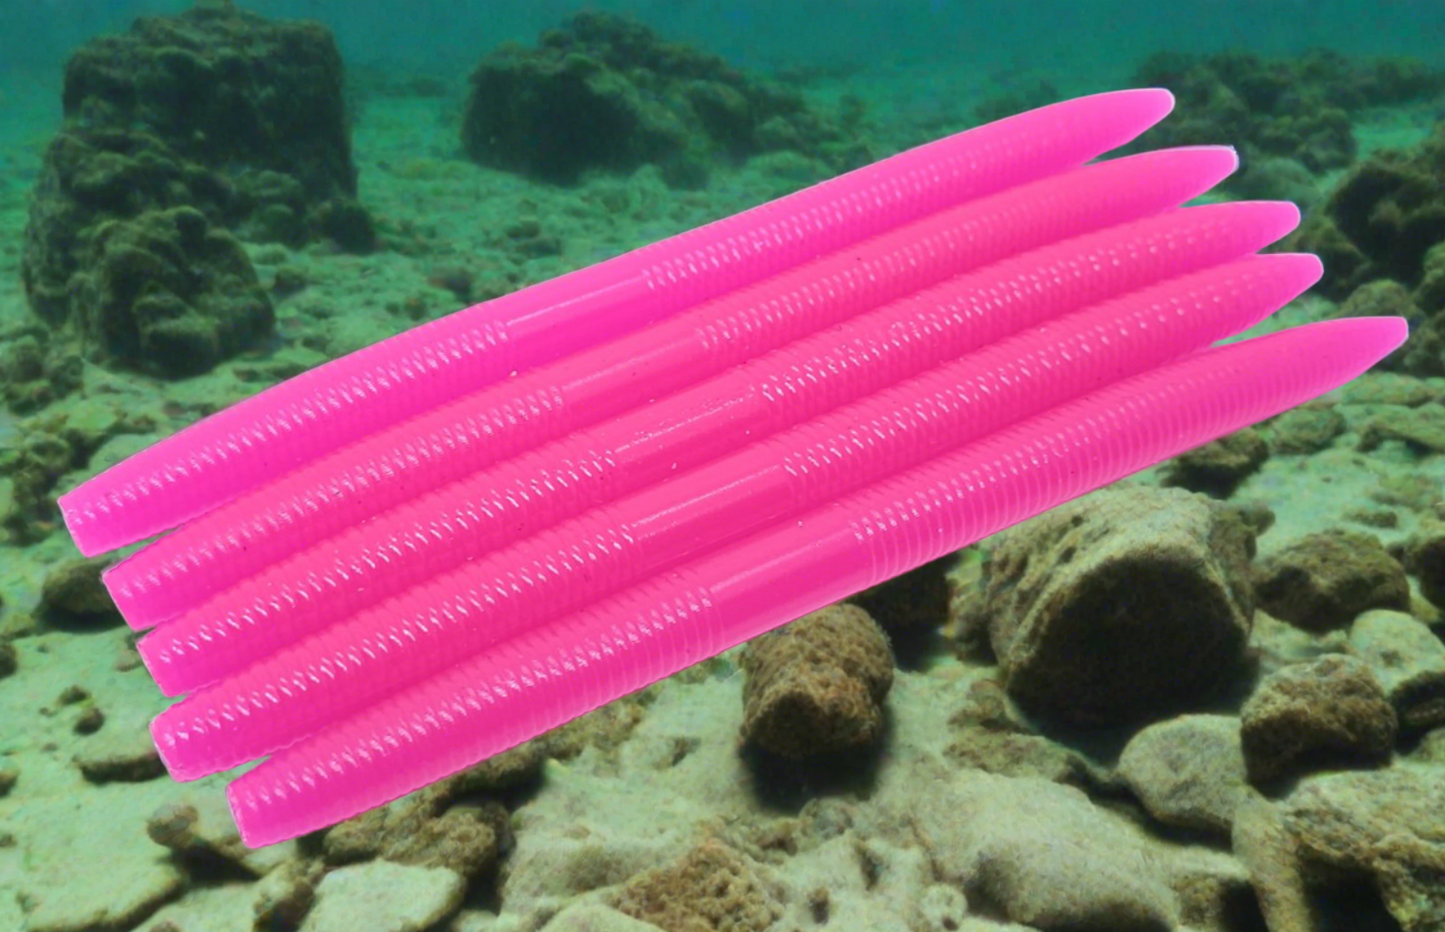 SW-12 Flamingo Hot Pink Stick Worm 8 pack